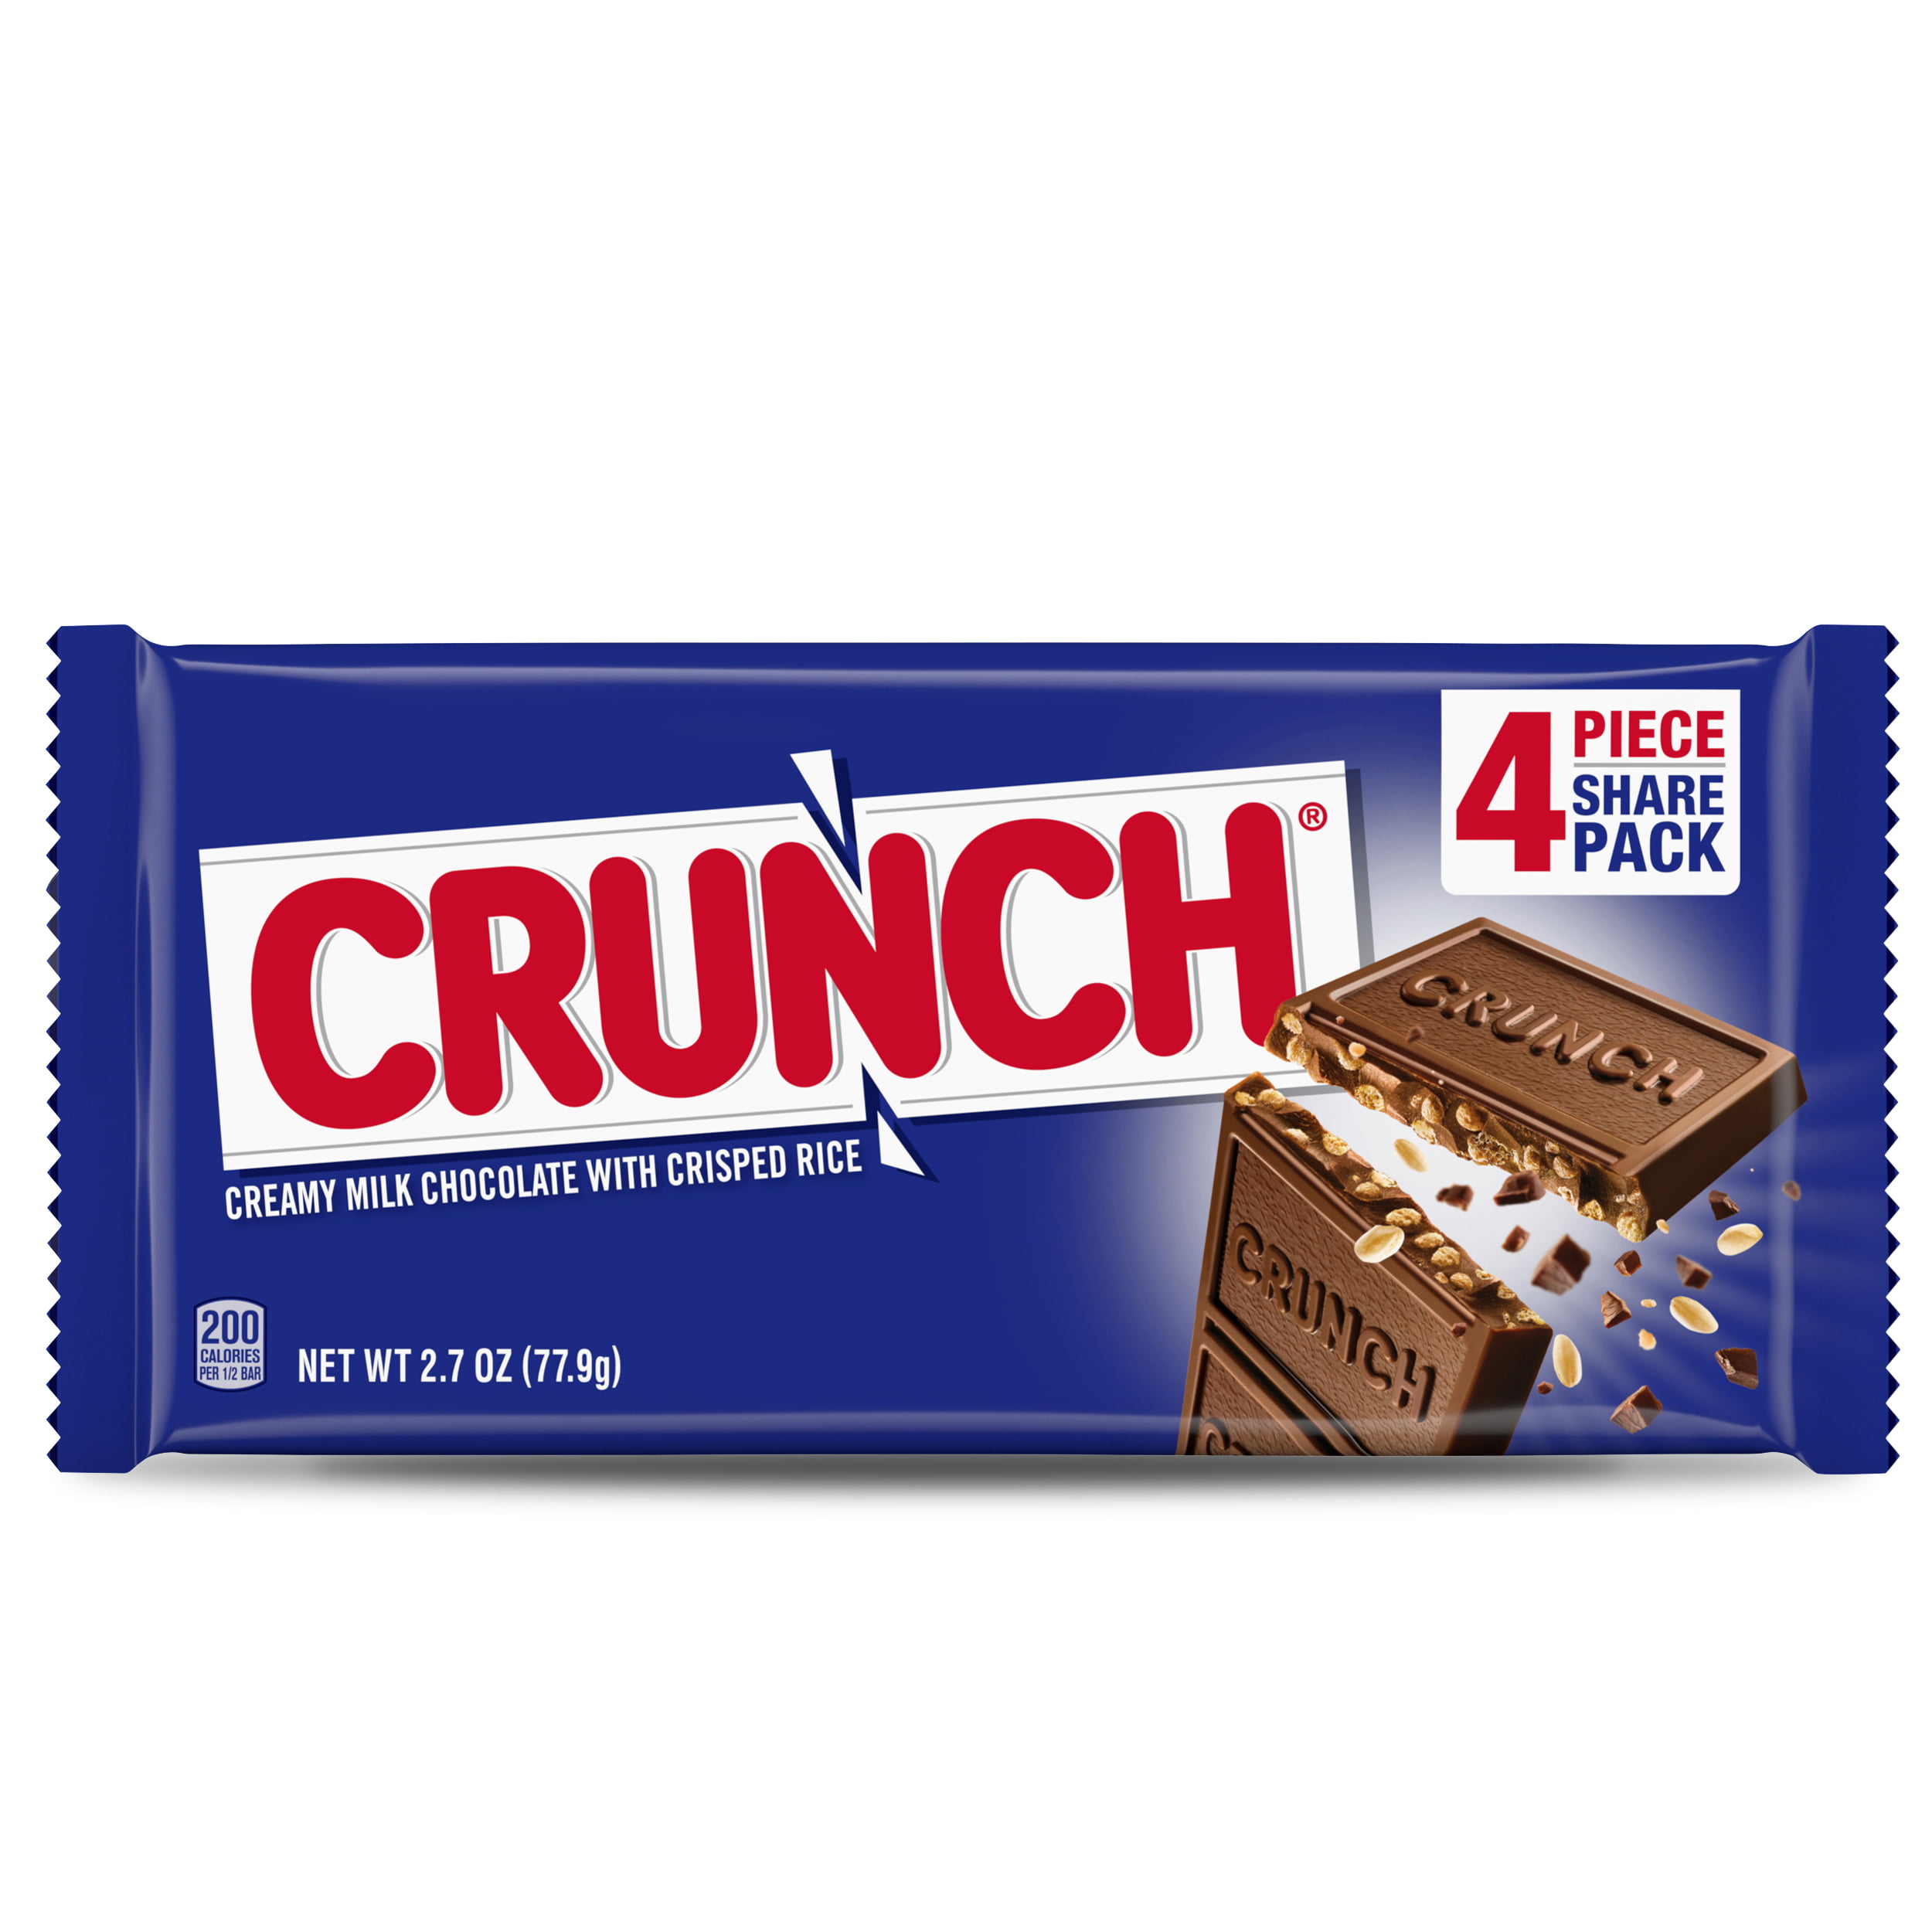 Crunch Milk Chocolate Candy Bar, Great for Easter Candy, 2.7oz Share Pack, 1 Count